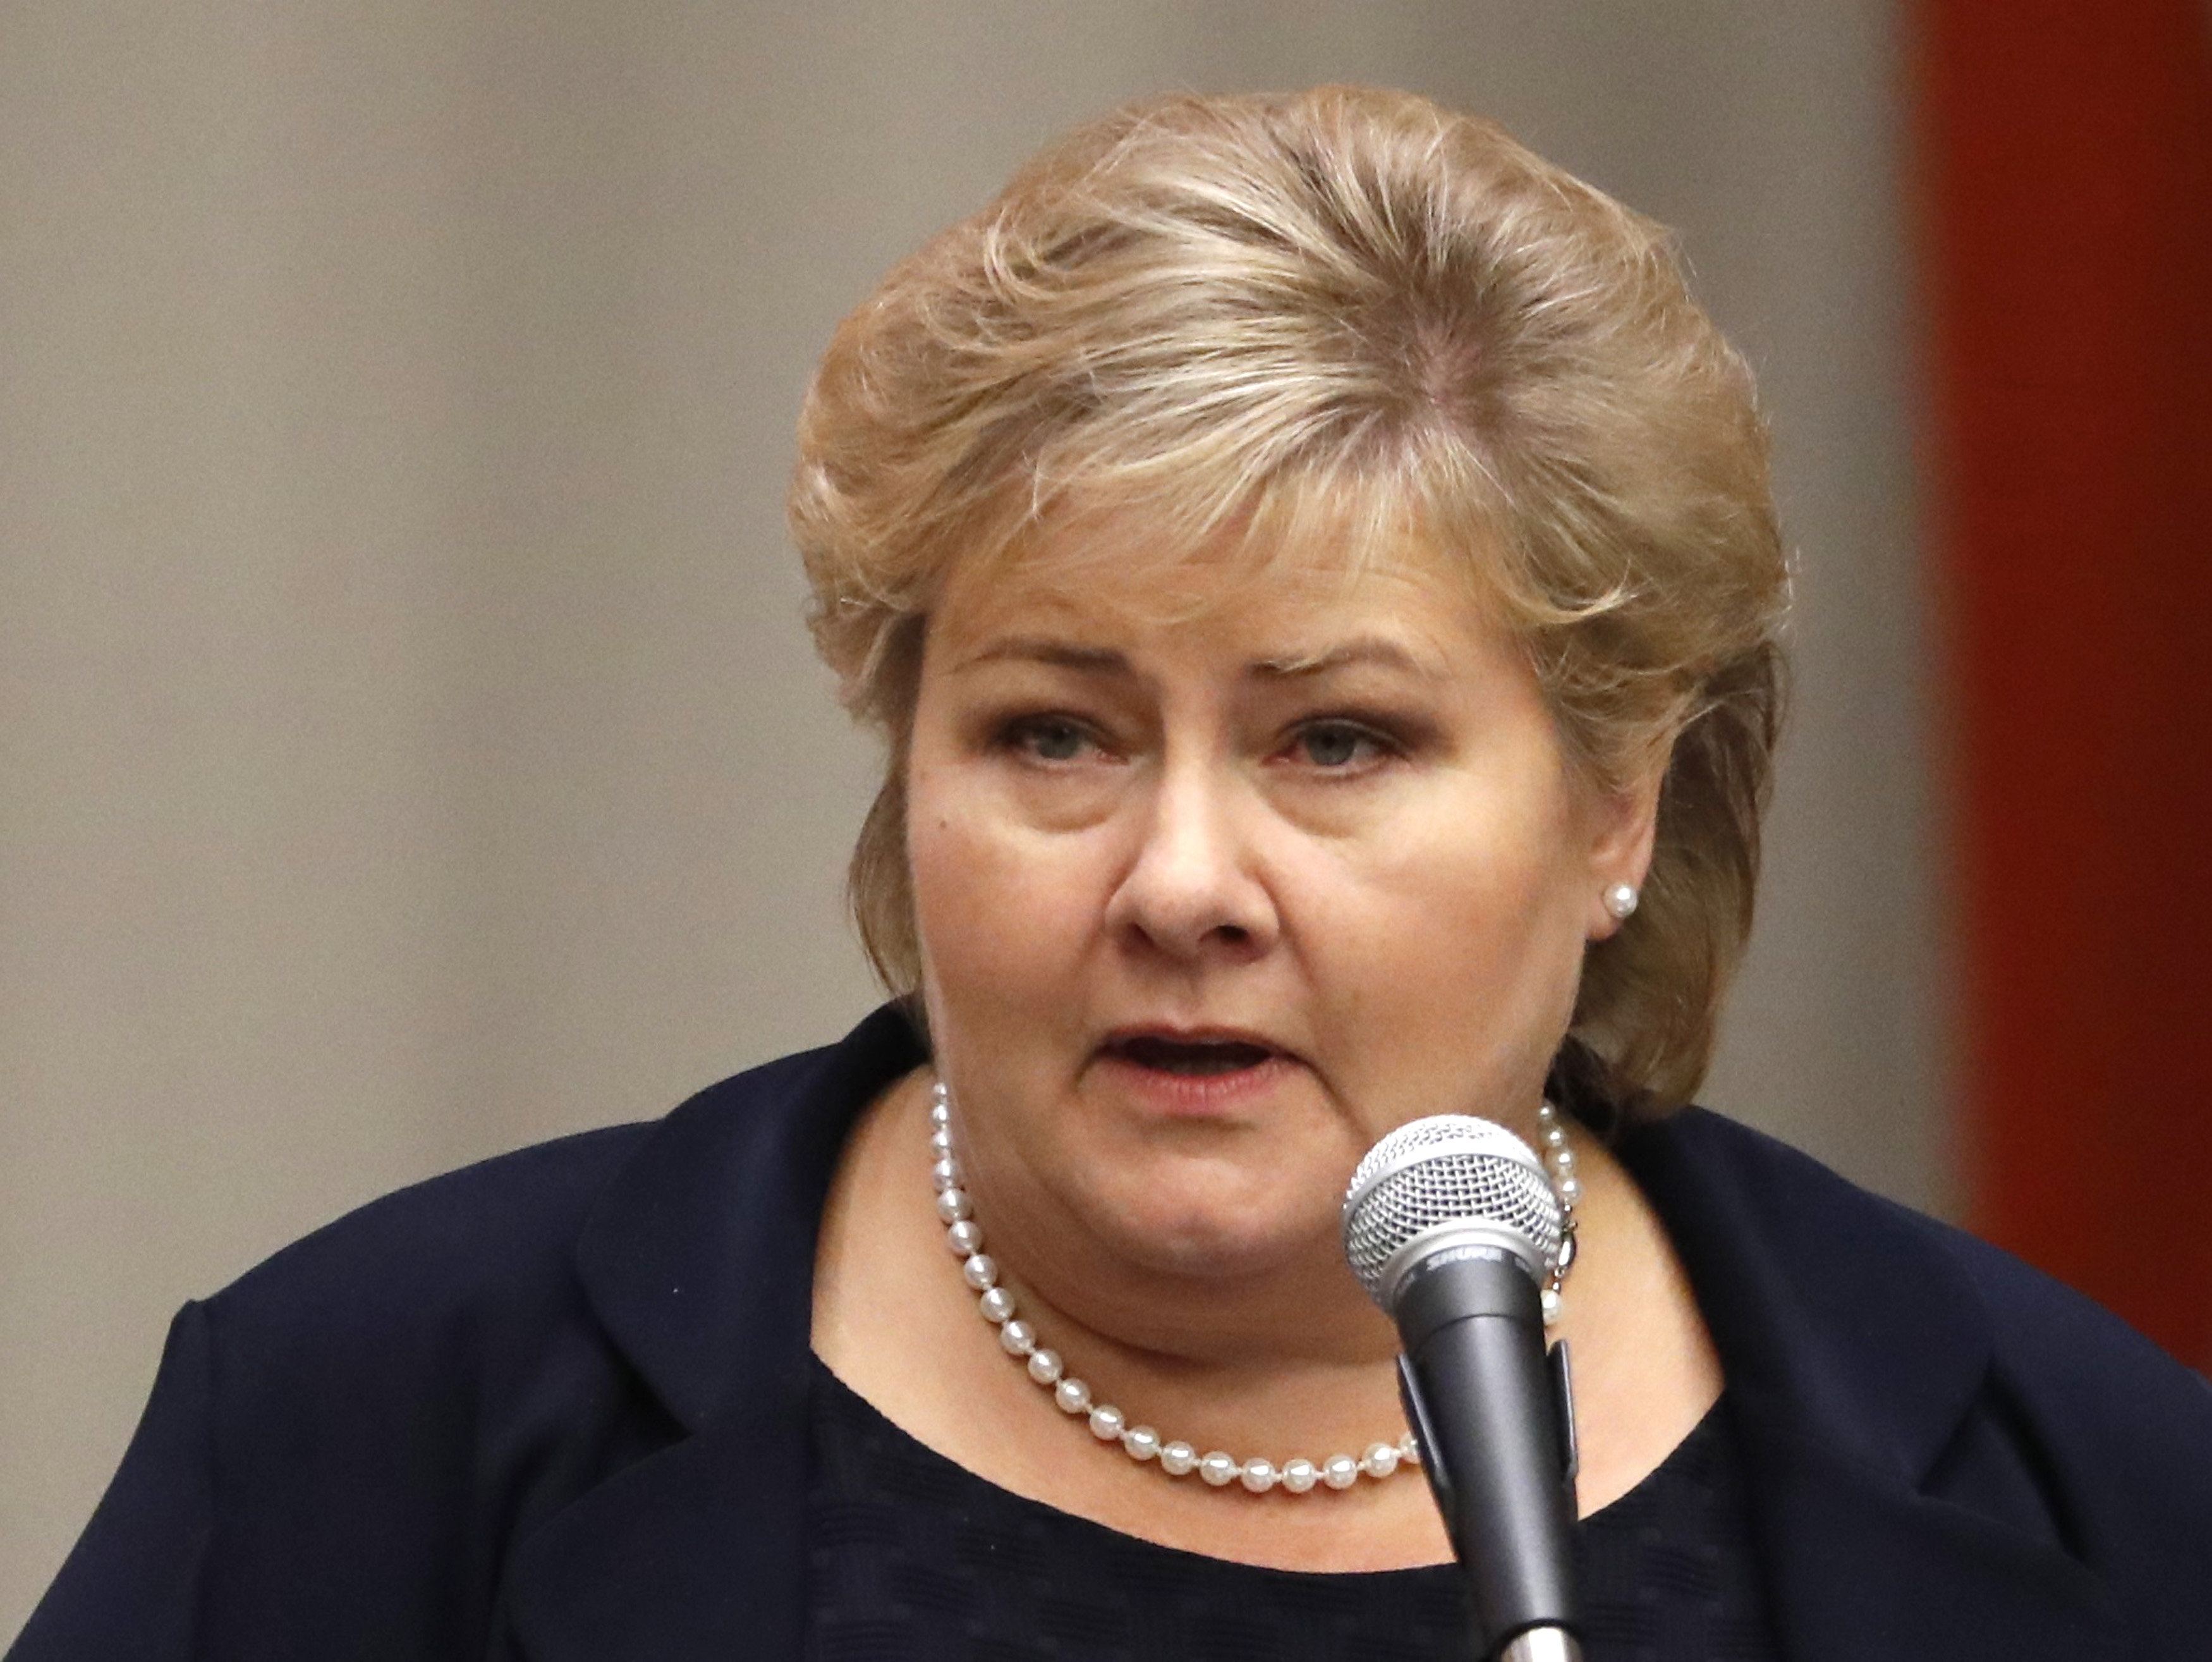 Prime Minister Erna Solberg of Norway speaks during a high-level meeting on addressing large movements of refugees and migrants at the United Nations General Assembly in New York on Sept. 19, 2016. (Lucas Jackson—Reuters)